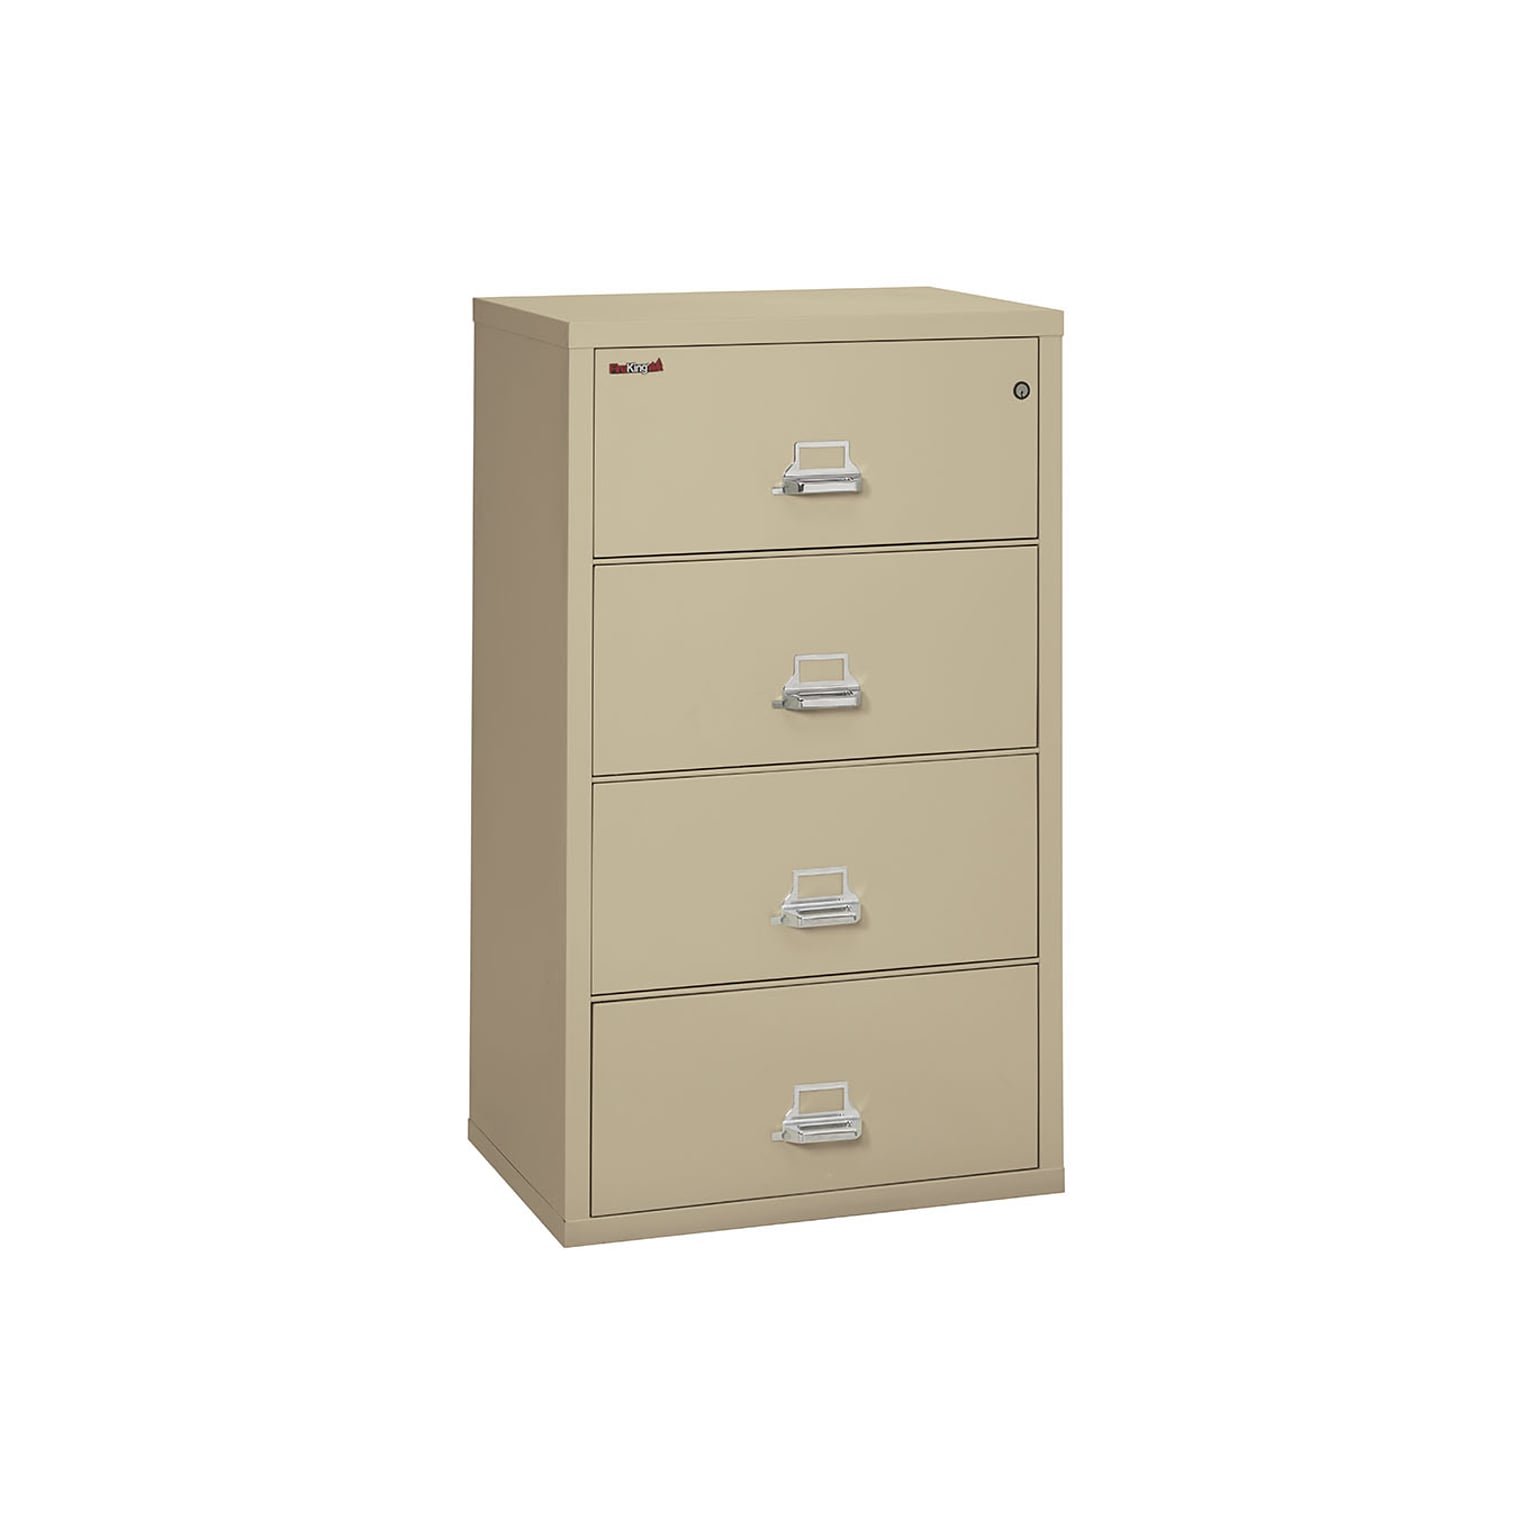 FireKing Classic 4-Drawer Lateral File Cabinet, Fire Resistant, Letter/Legal, Parchment, 31.18W (4-3122-CPA)